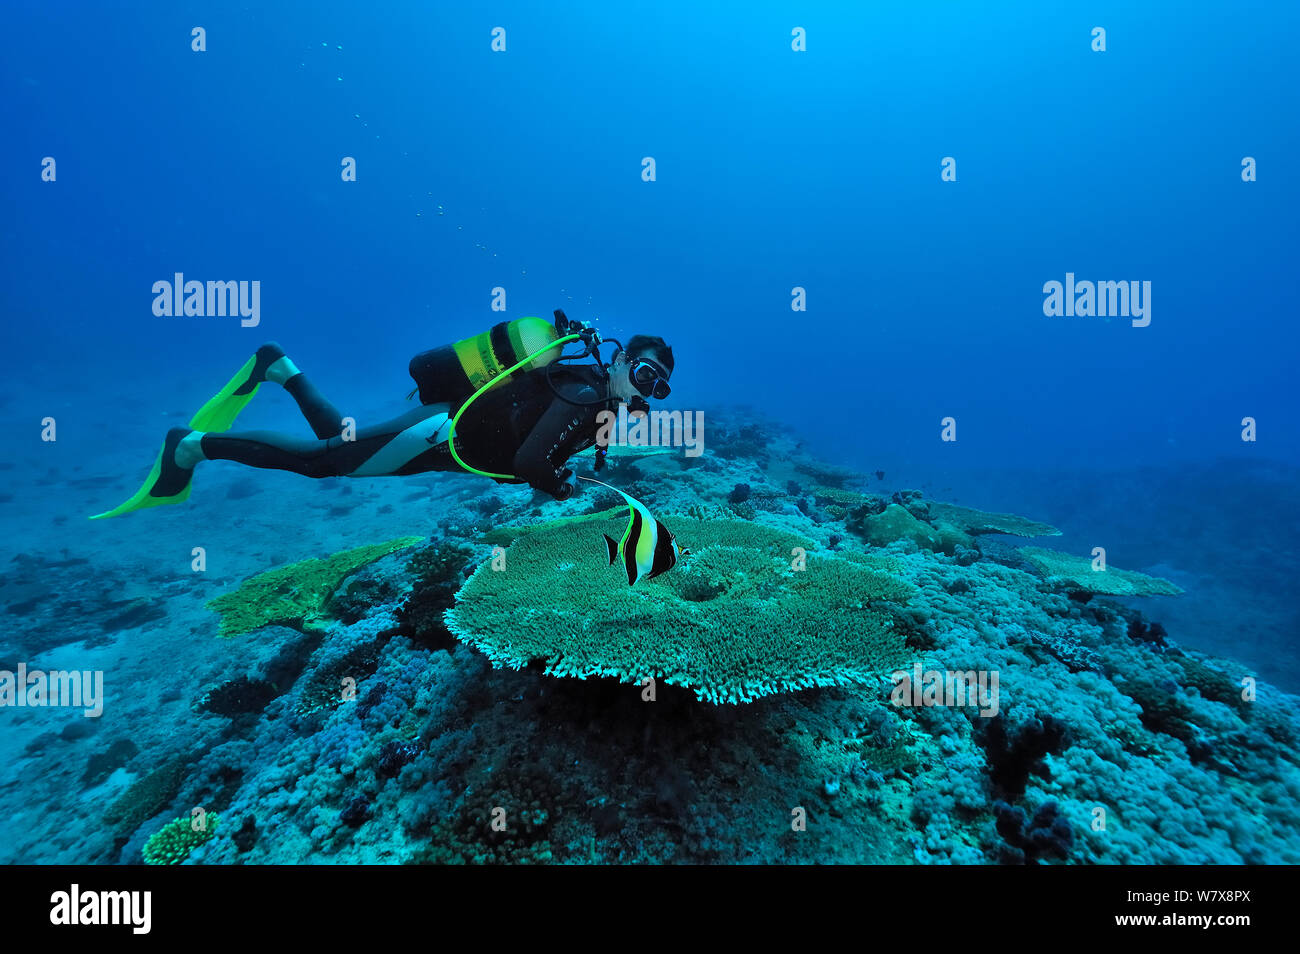 Diver above a coral reef with Table corals (Acropora) and Moorish idol (Zanclus cornutus) Mayotte. Indian Ocean. February 2010. Stock Photo